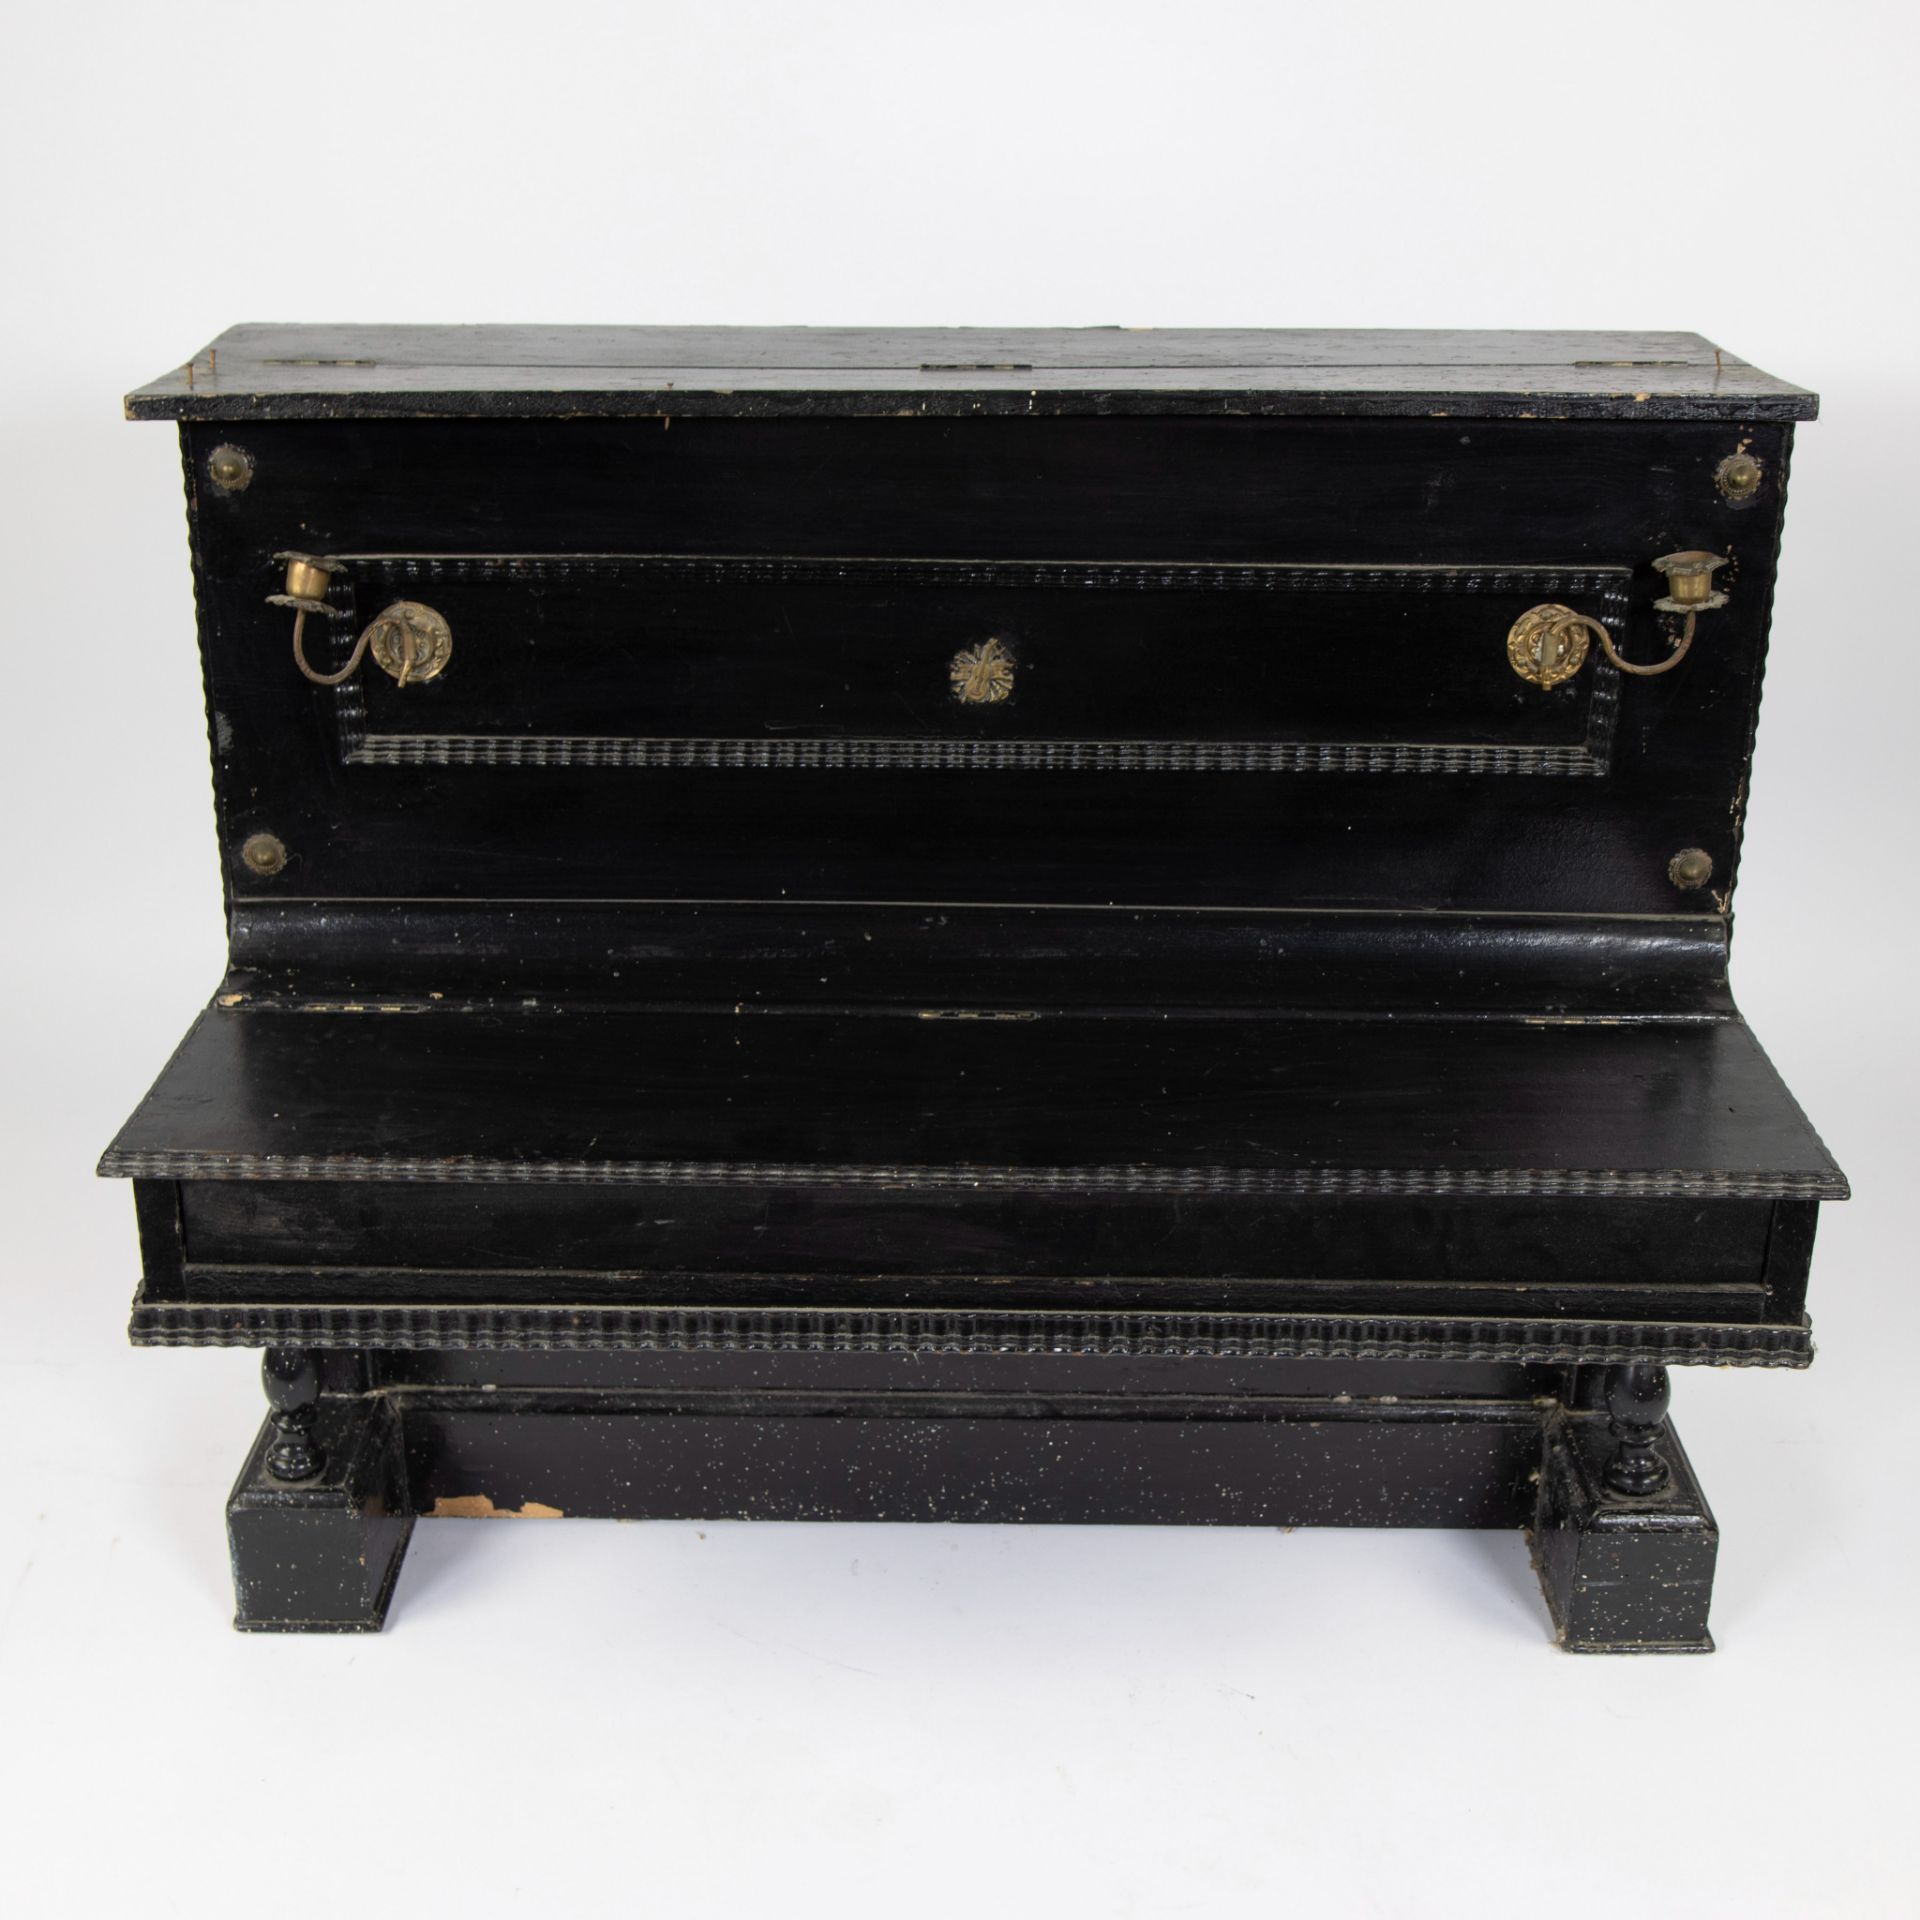 Mini piano with ivory keys and strings on a wooden frame, ca 1880 - Image 2 of 5